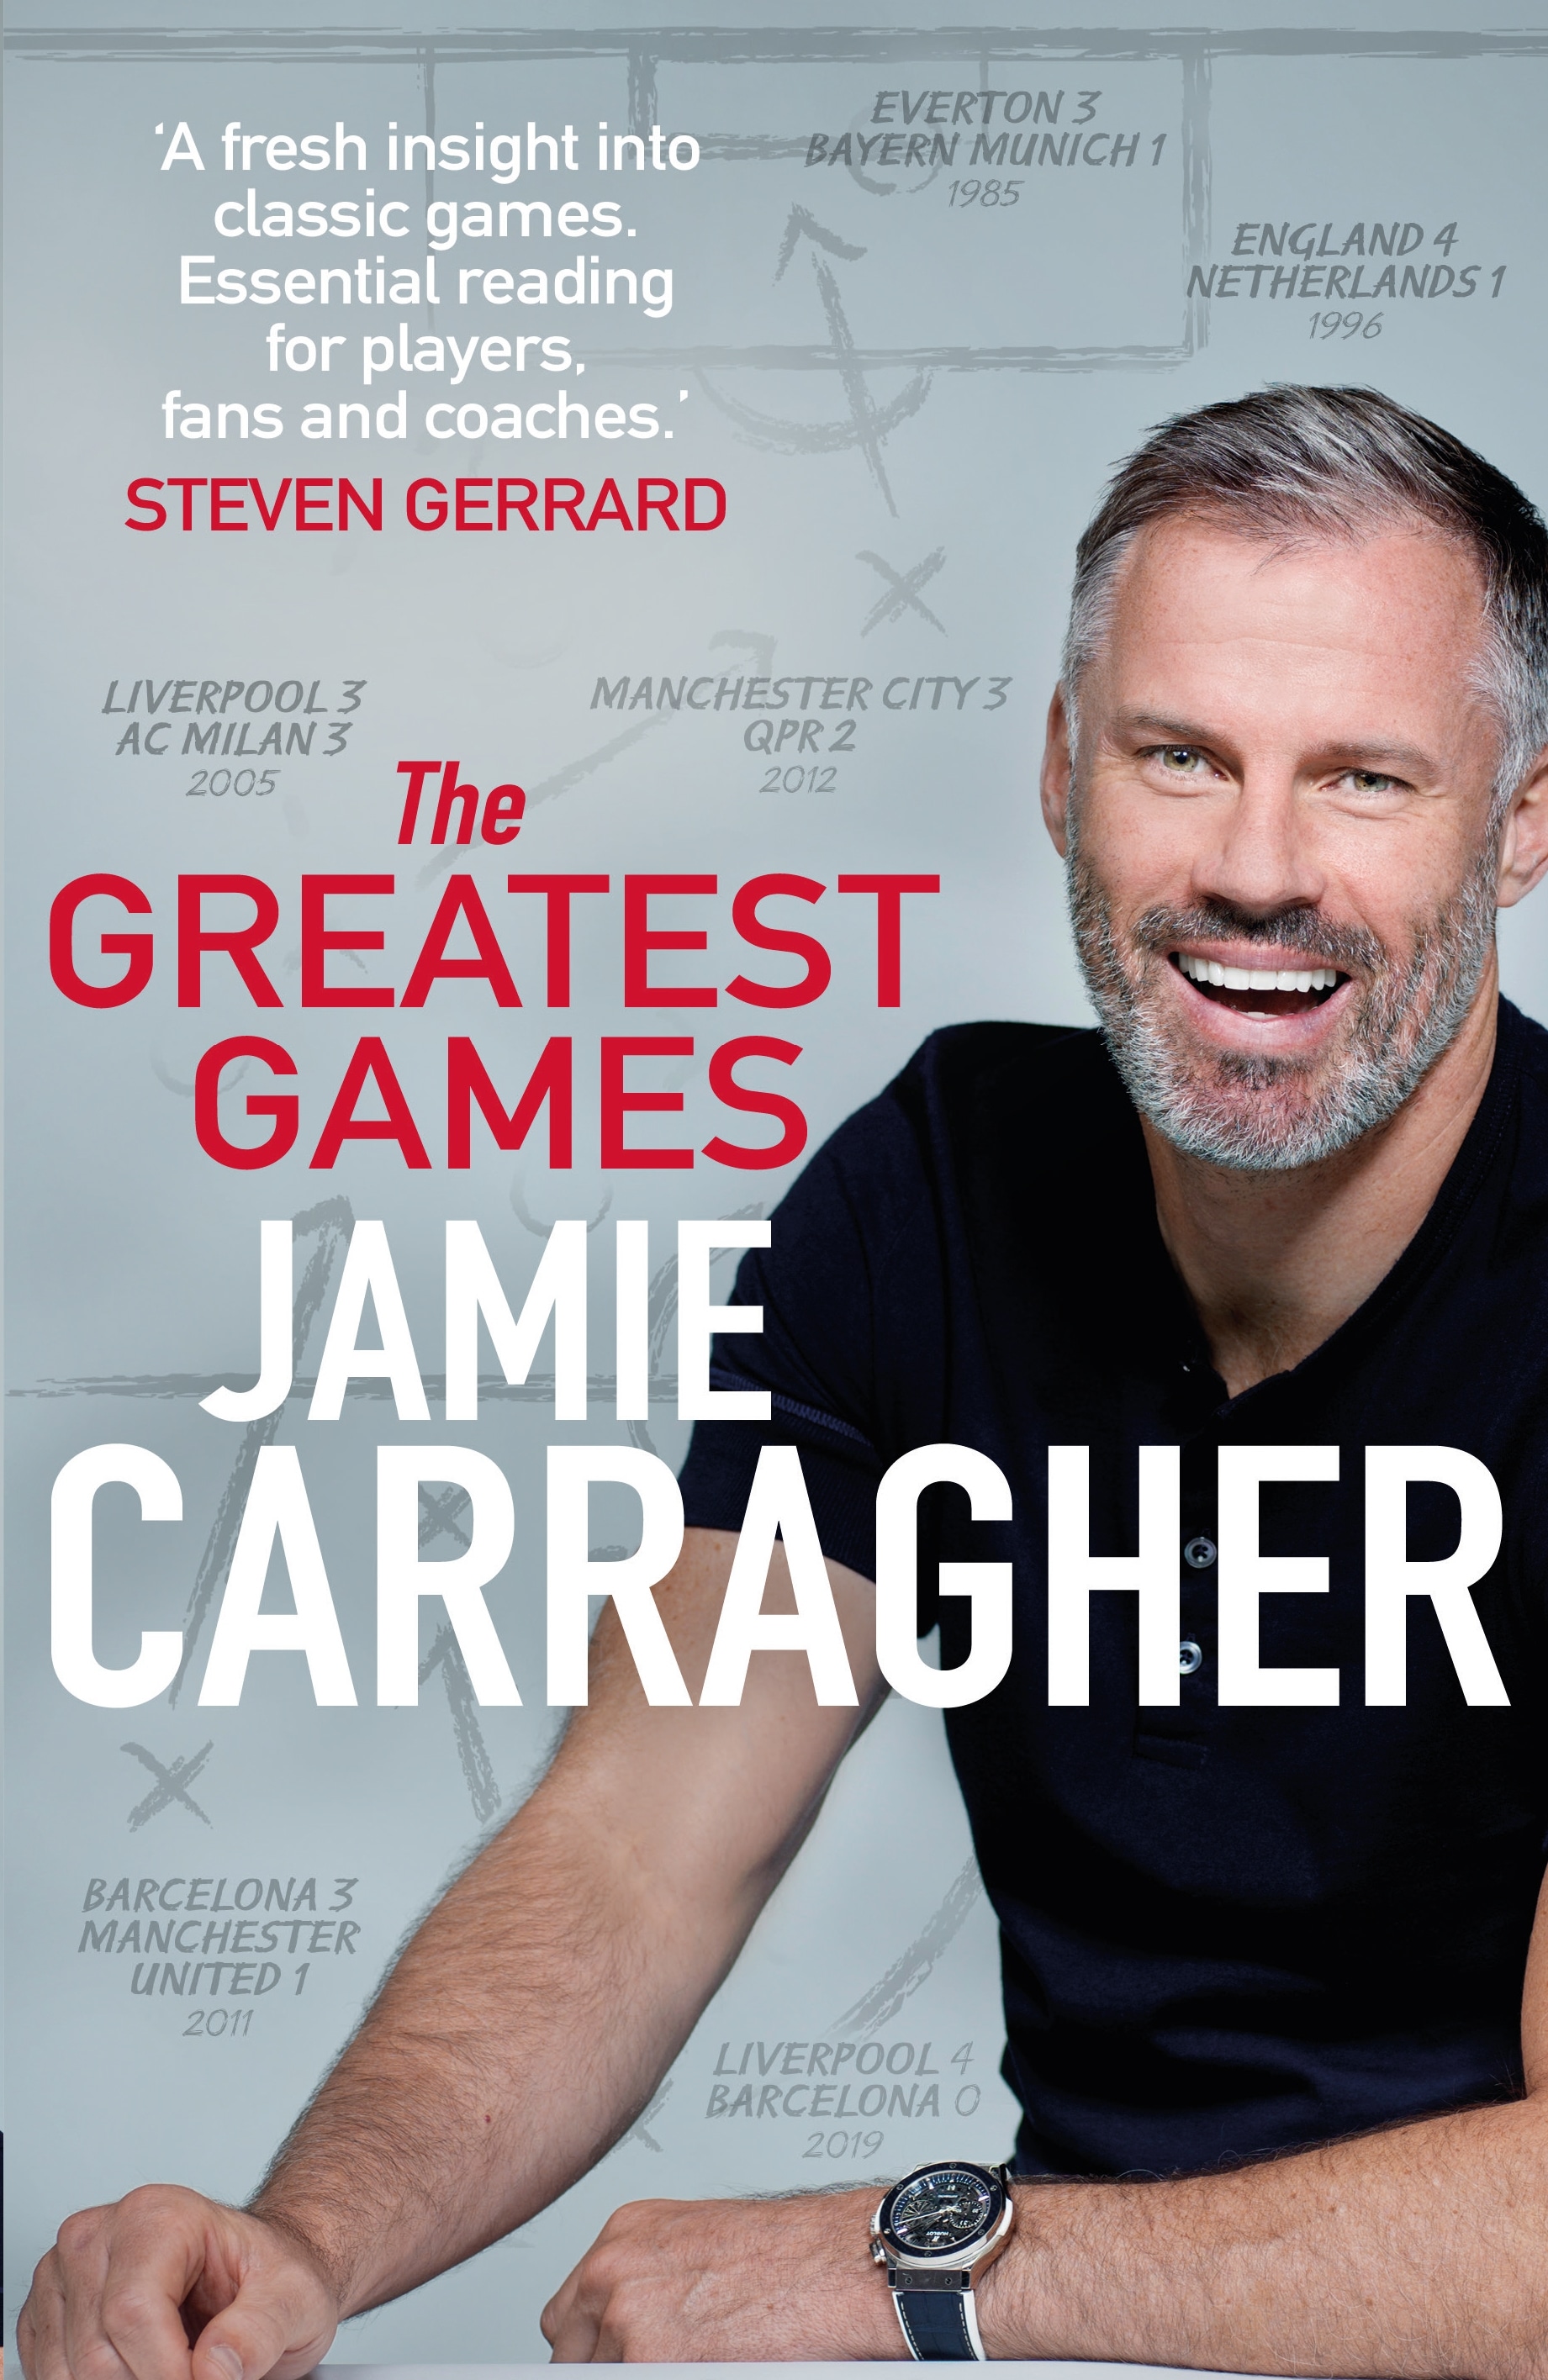 Book “The Greatest Games” by Jamie Carragher — November 12, 2020